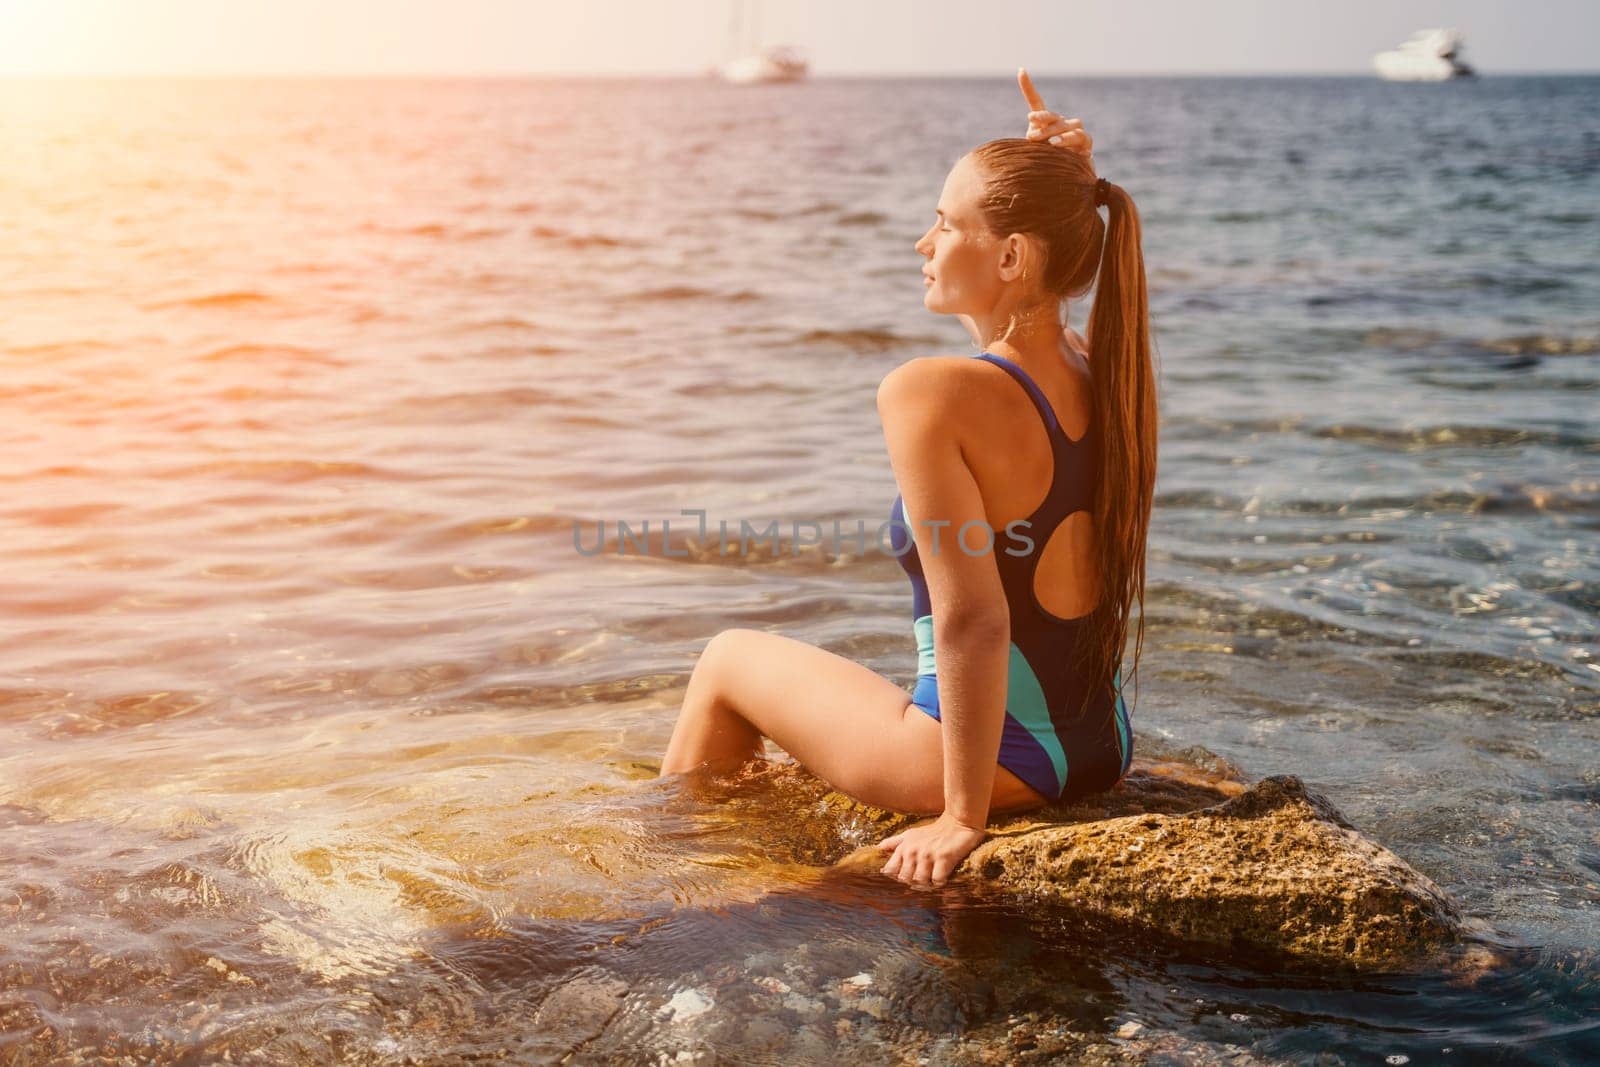 Woman travel sea. Happy tourist in blue swimwear takes a photo outdoors to capture memories. woman traveling and enjoying her surroundings on the beach, with volcanic mountains in the background. by panophotograph